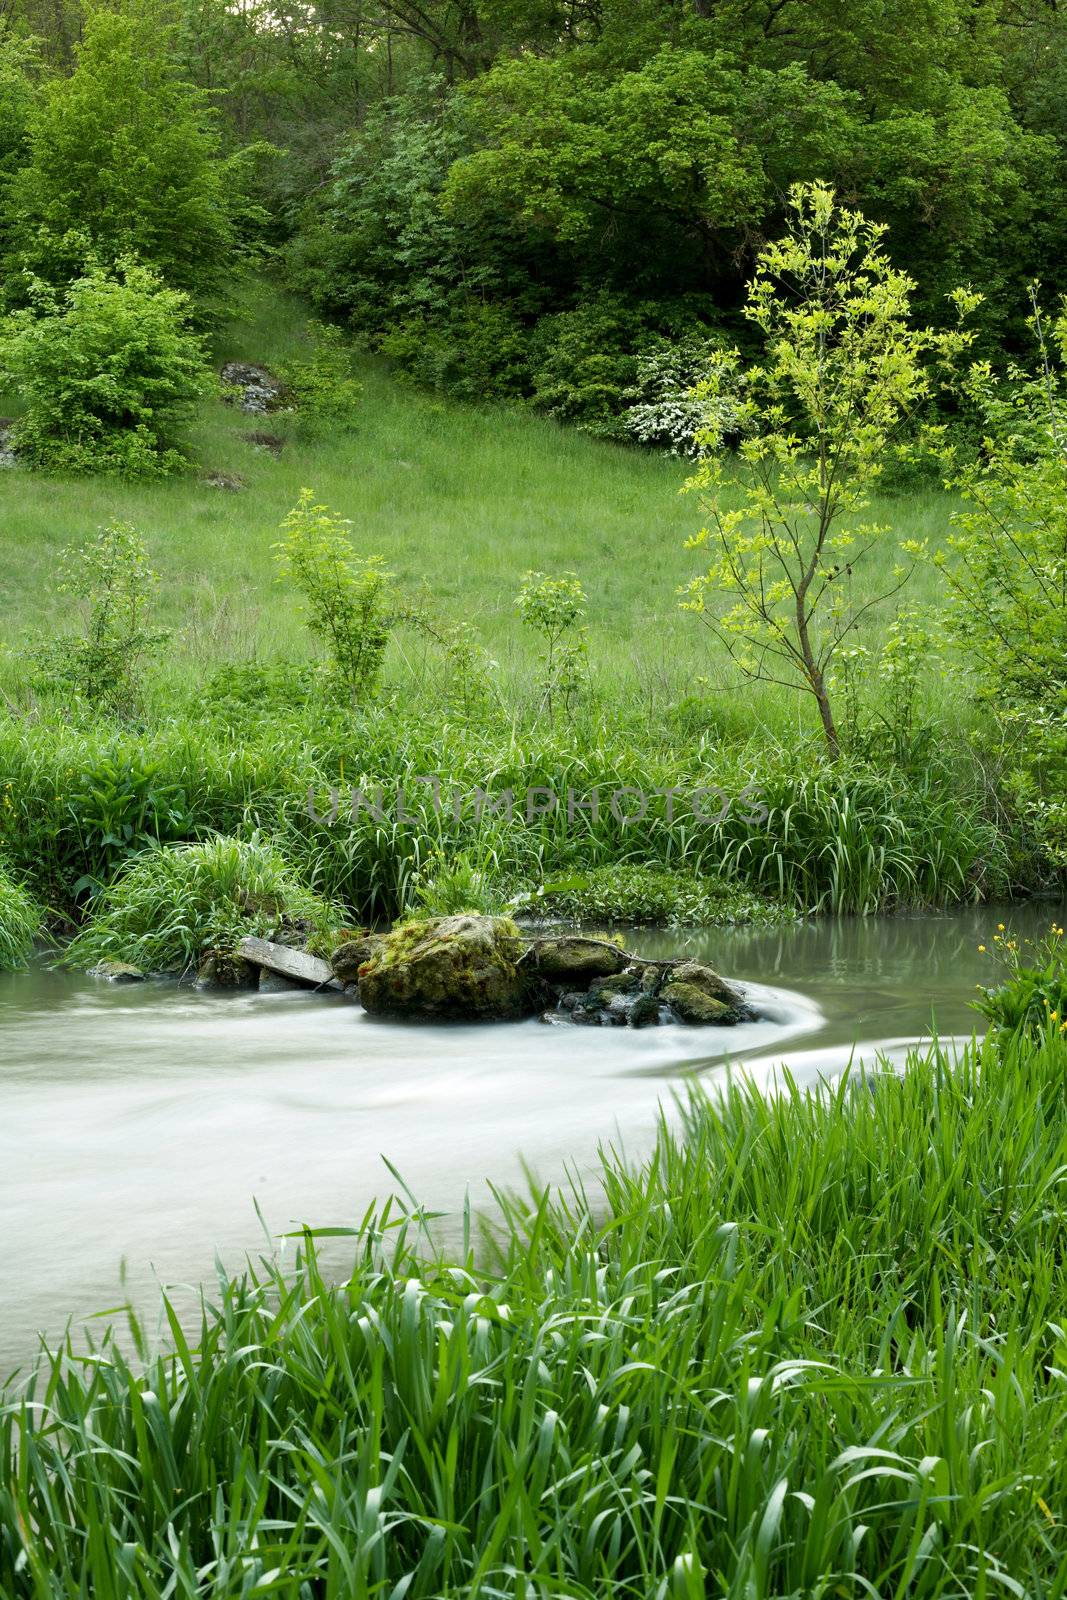 An image of a river with green grass in spring forest